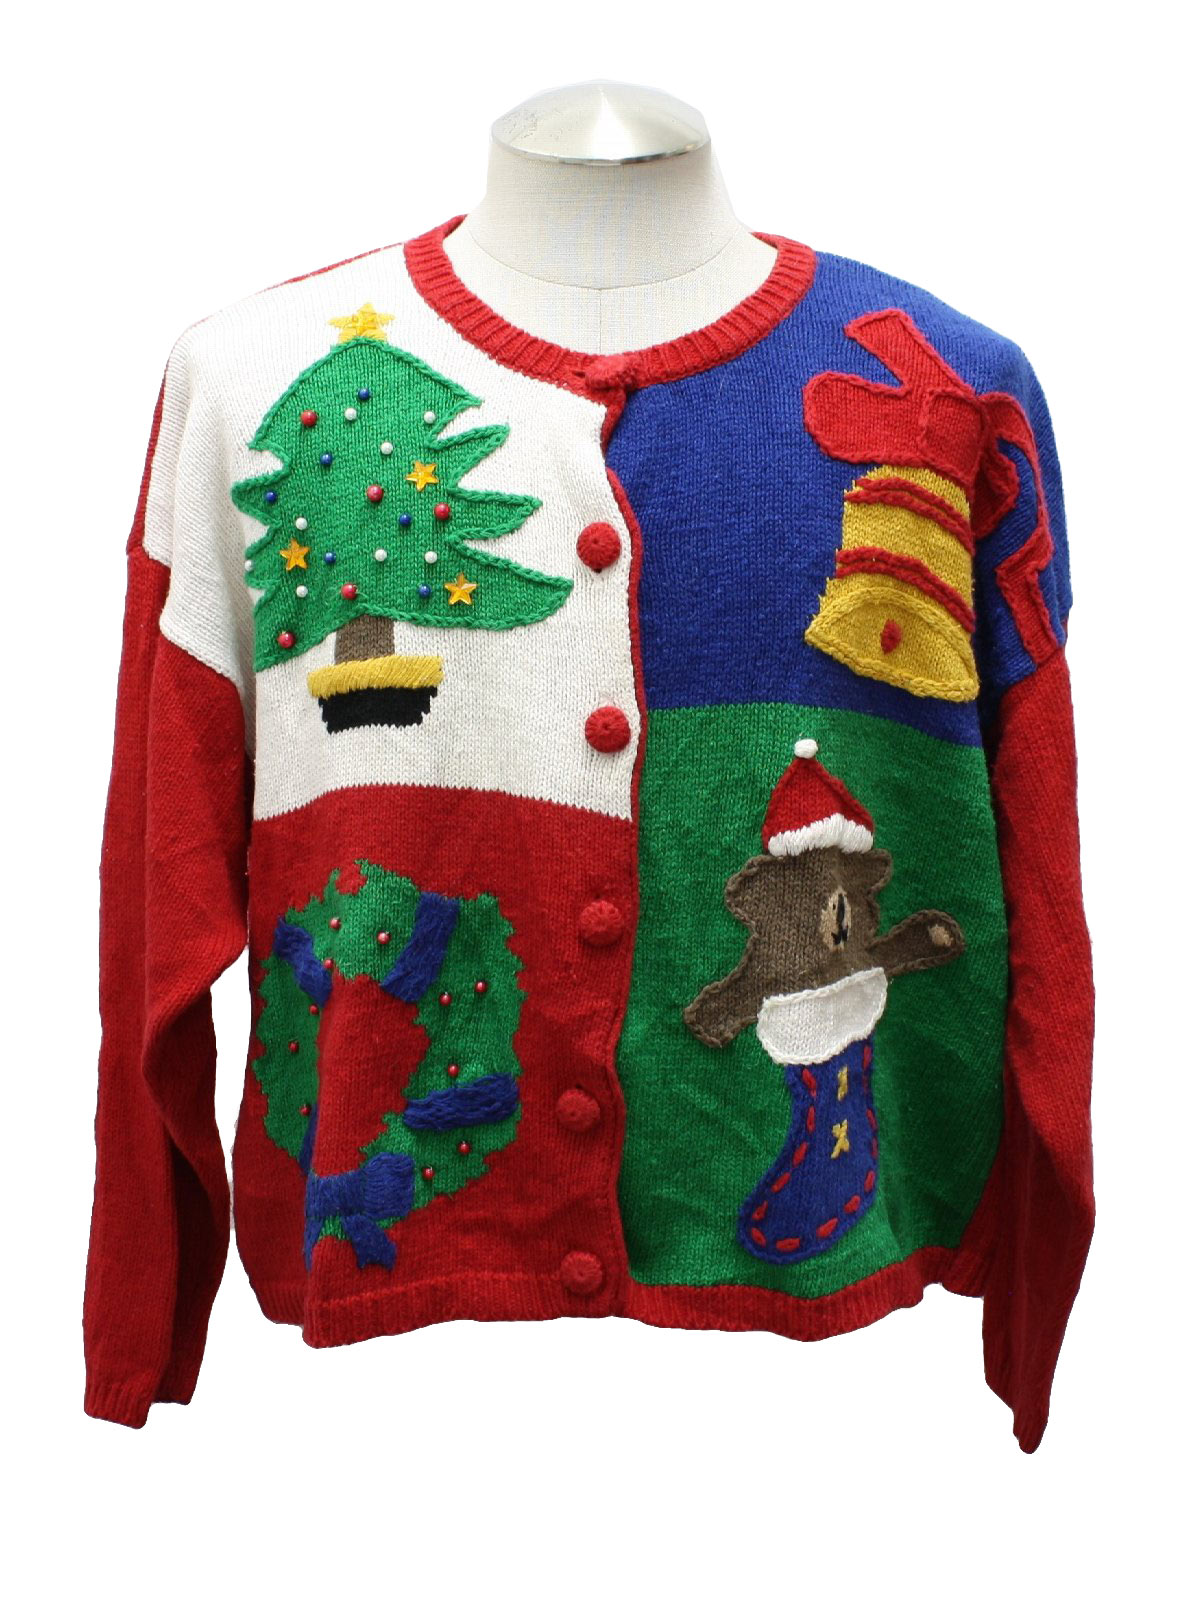 Womens Ugly Christmas Cardigan Sweater: -SJ Designs- Womens bright red ...